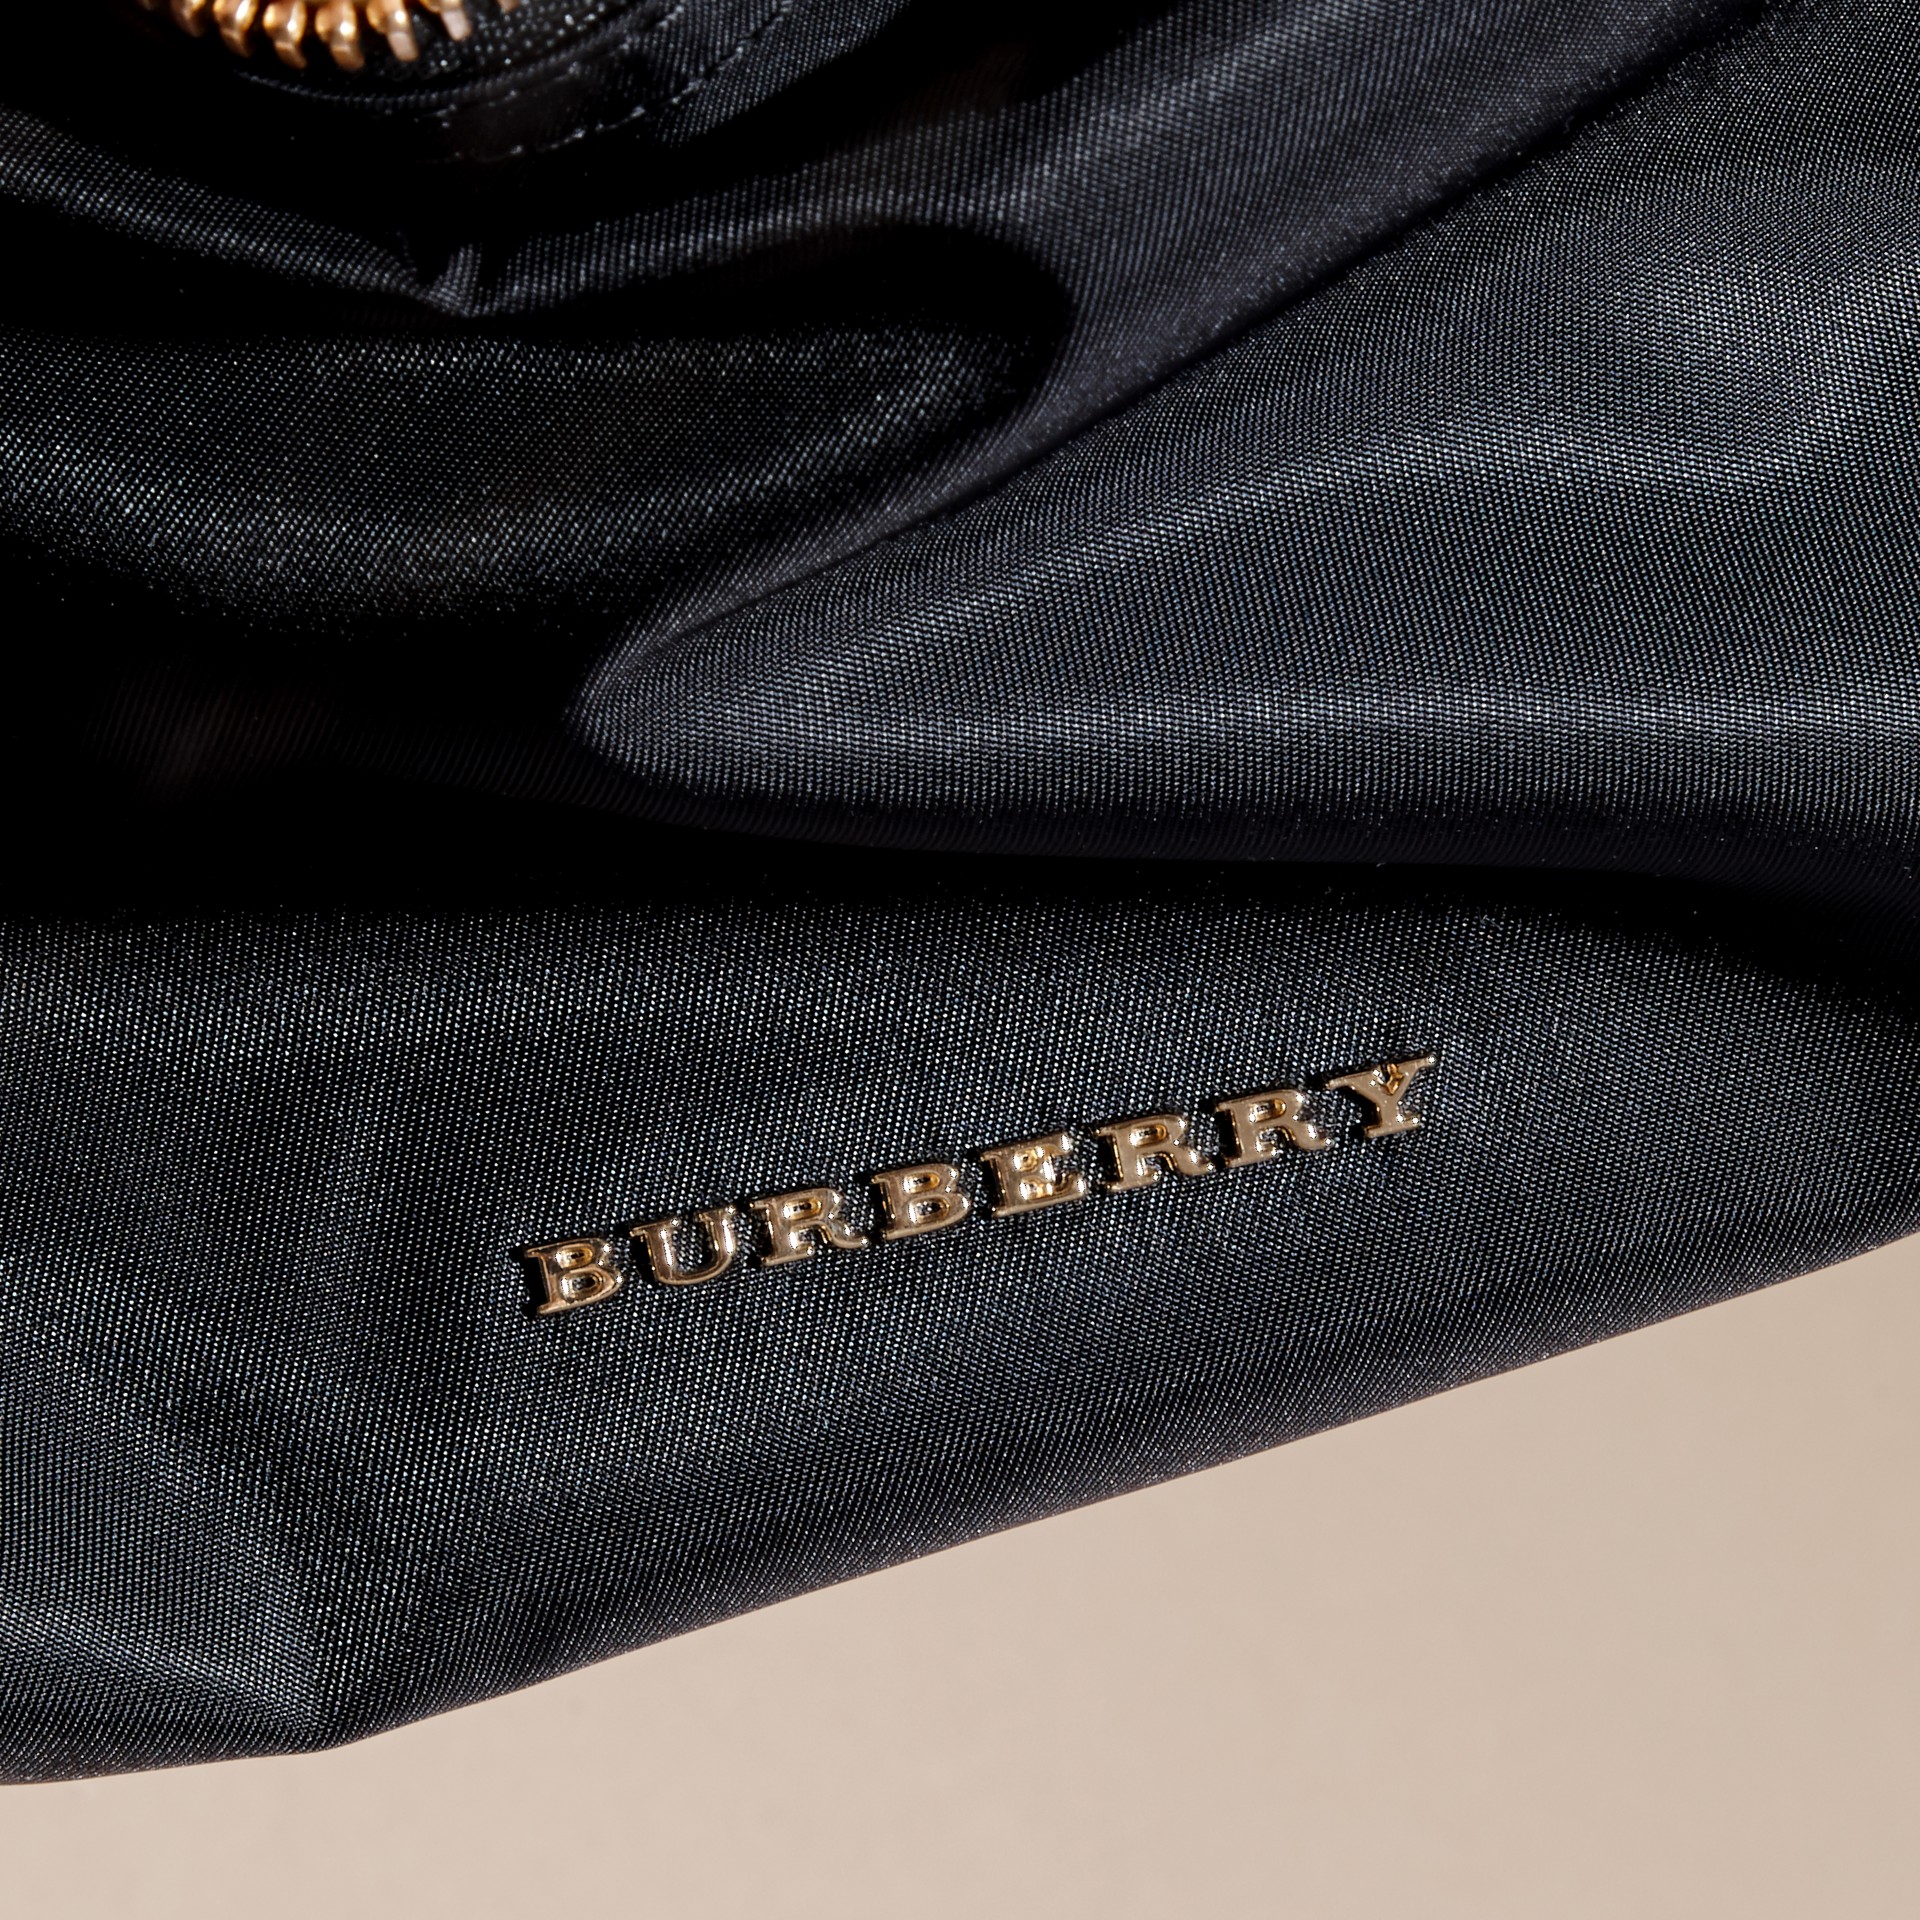 The Rucksack Backpack in Technical Nylon and Leather Black | Burberry